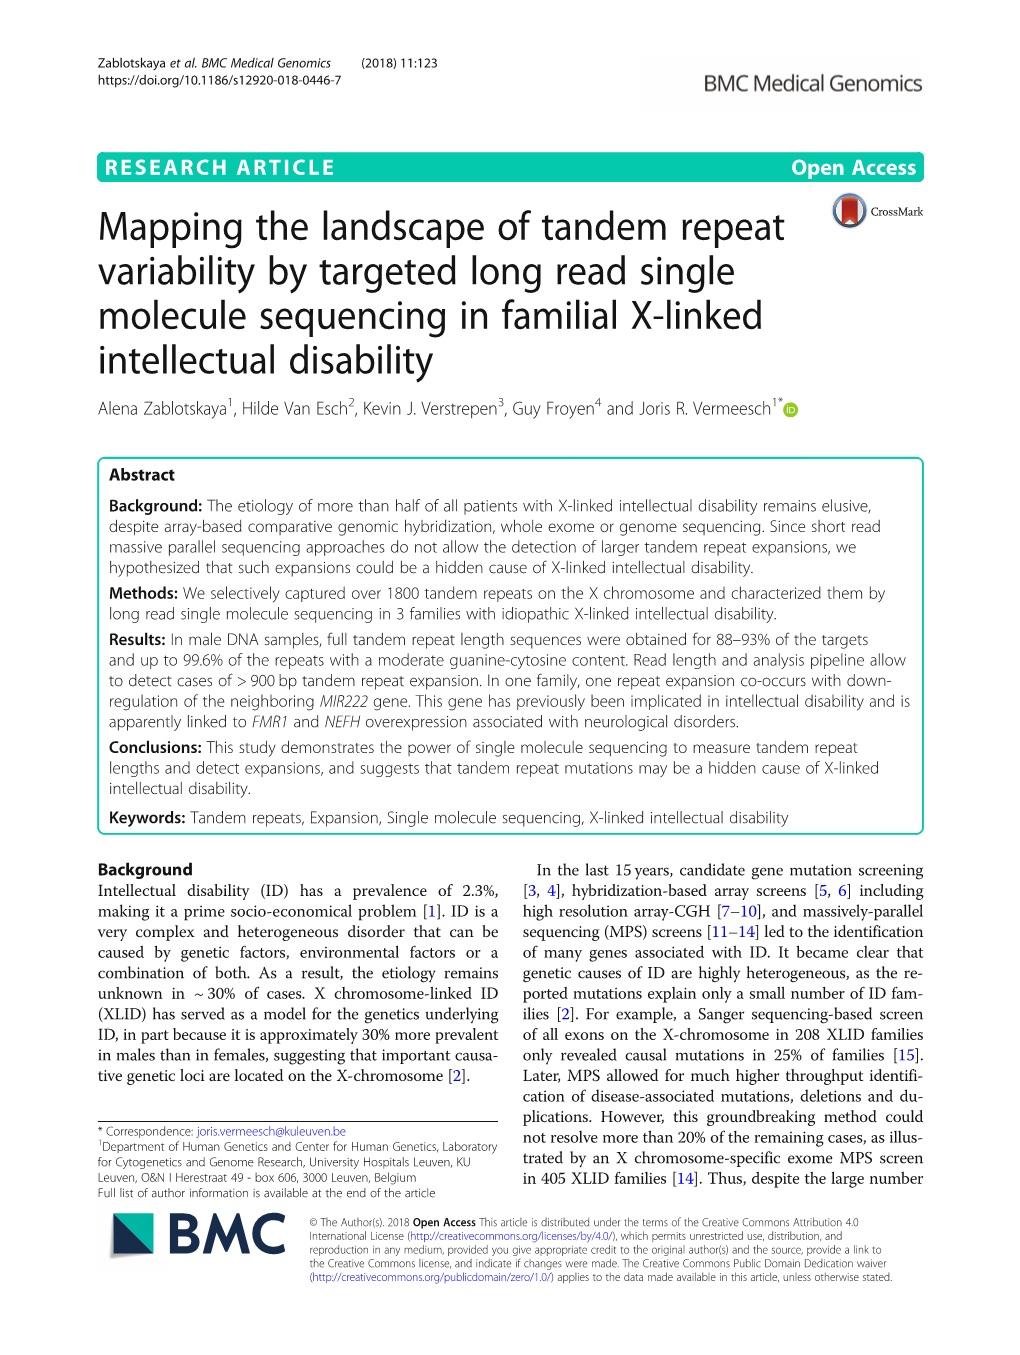 Mapping the Landscape of Tandem Repeat Variability by Targeted Long Read Single Molecule Sequencing in Familial X-Linked Intelle